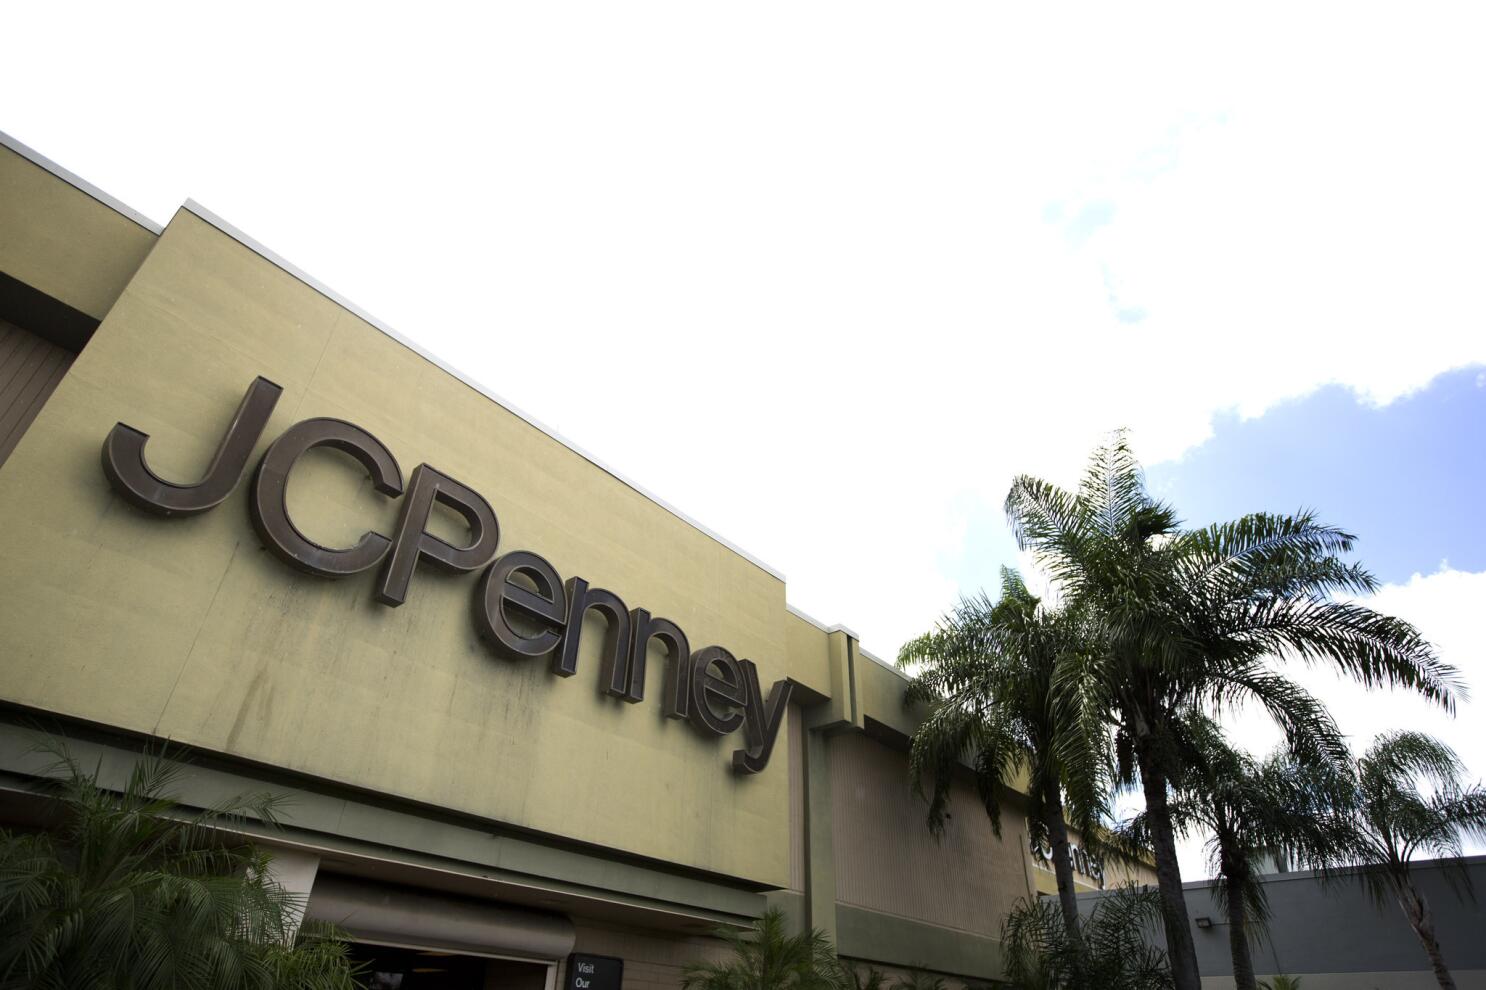 JCPenney closing stores: 18 locations scheduled to close May 16